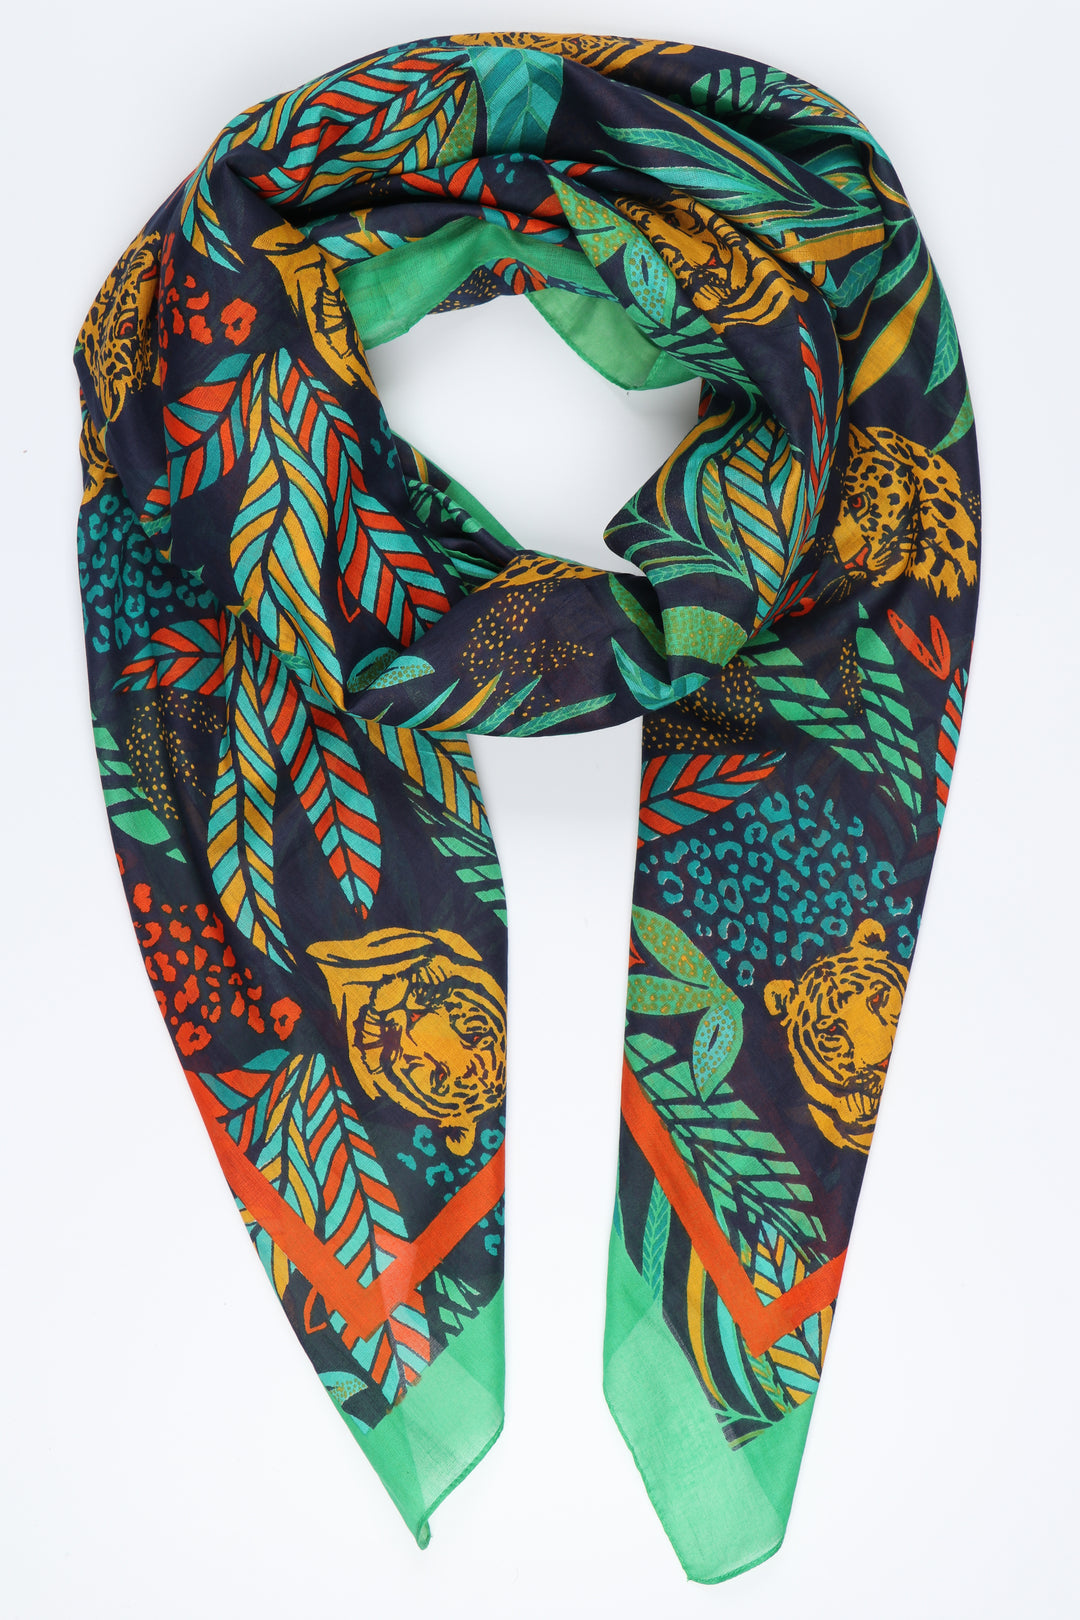 navy blue, green, orange scarf with orange border trim and an all over pattern featuring tigers and colourful jungle leaves